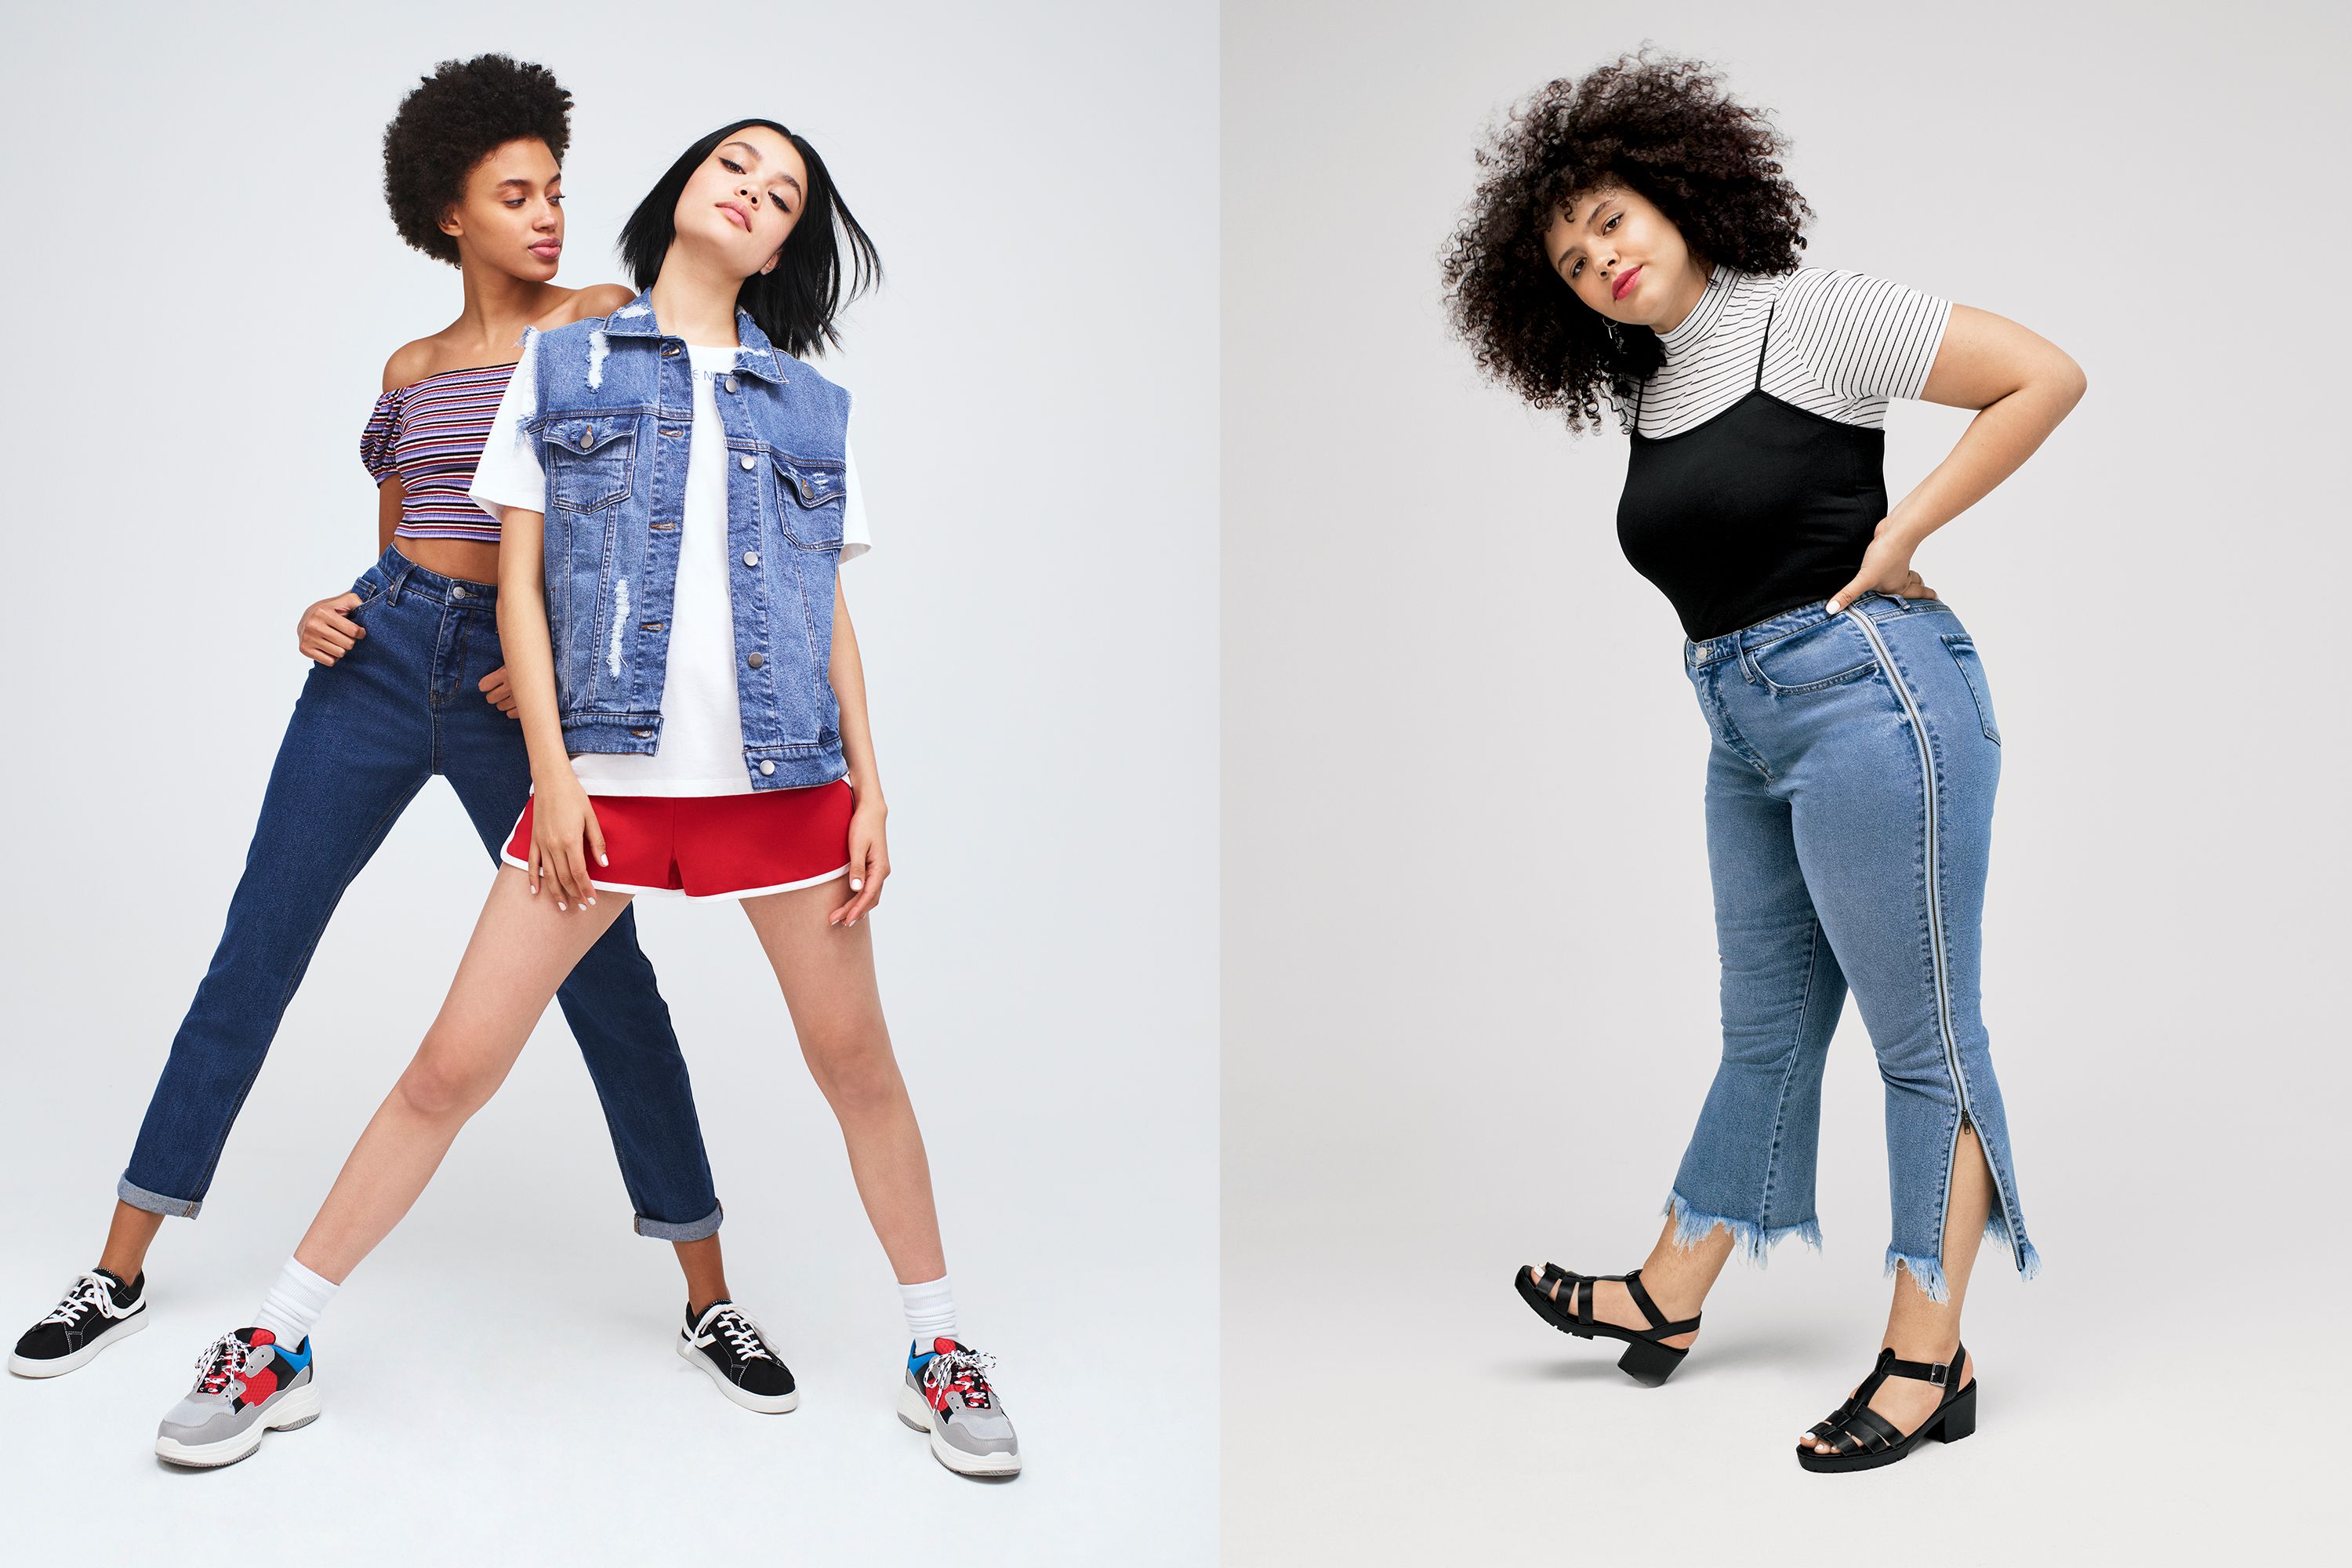 Target Debuts Two New Labels, Wild Fable and Original Use - Target Style's  Brand-New Look for Men and Women